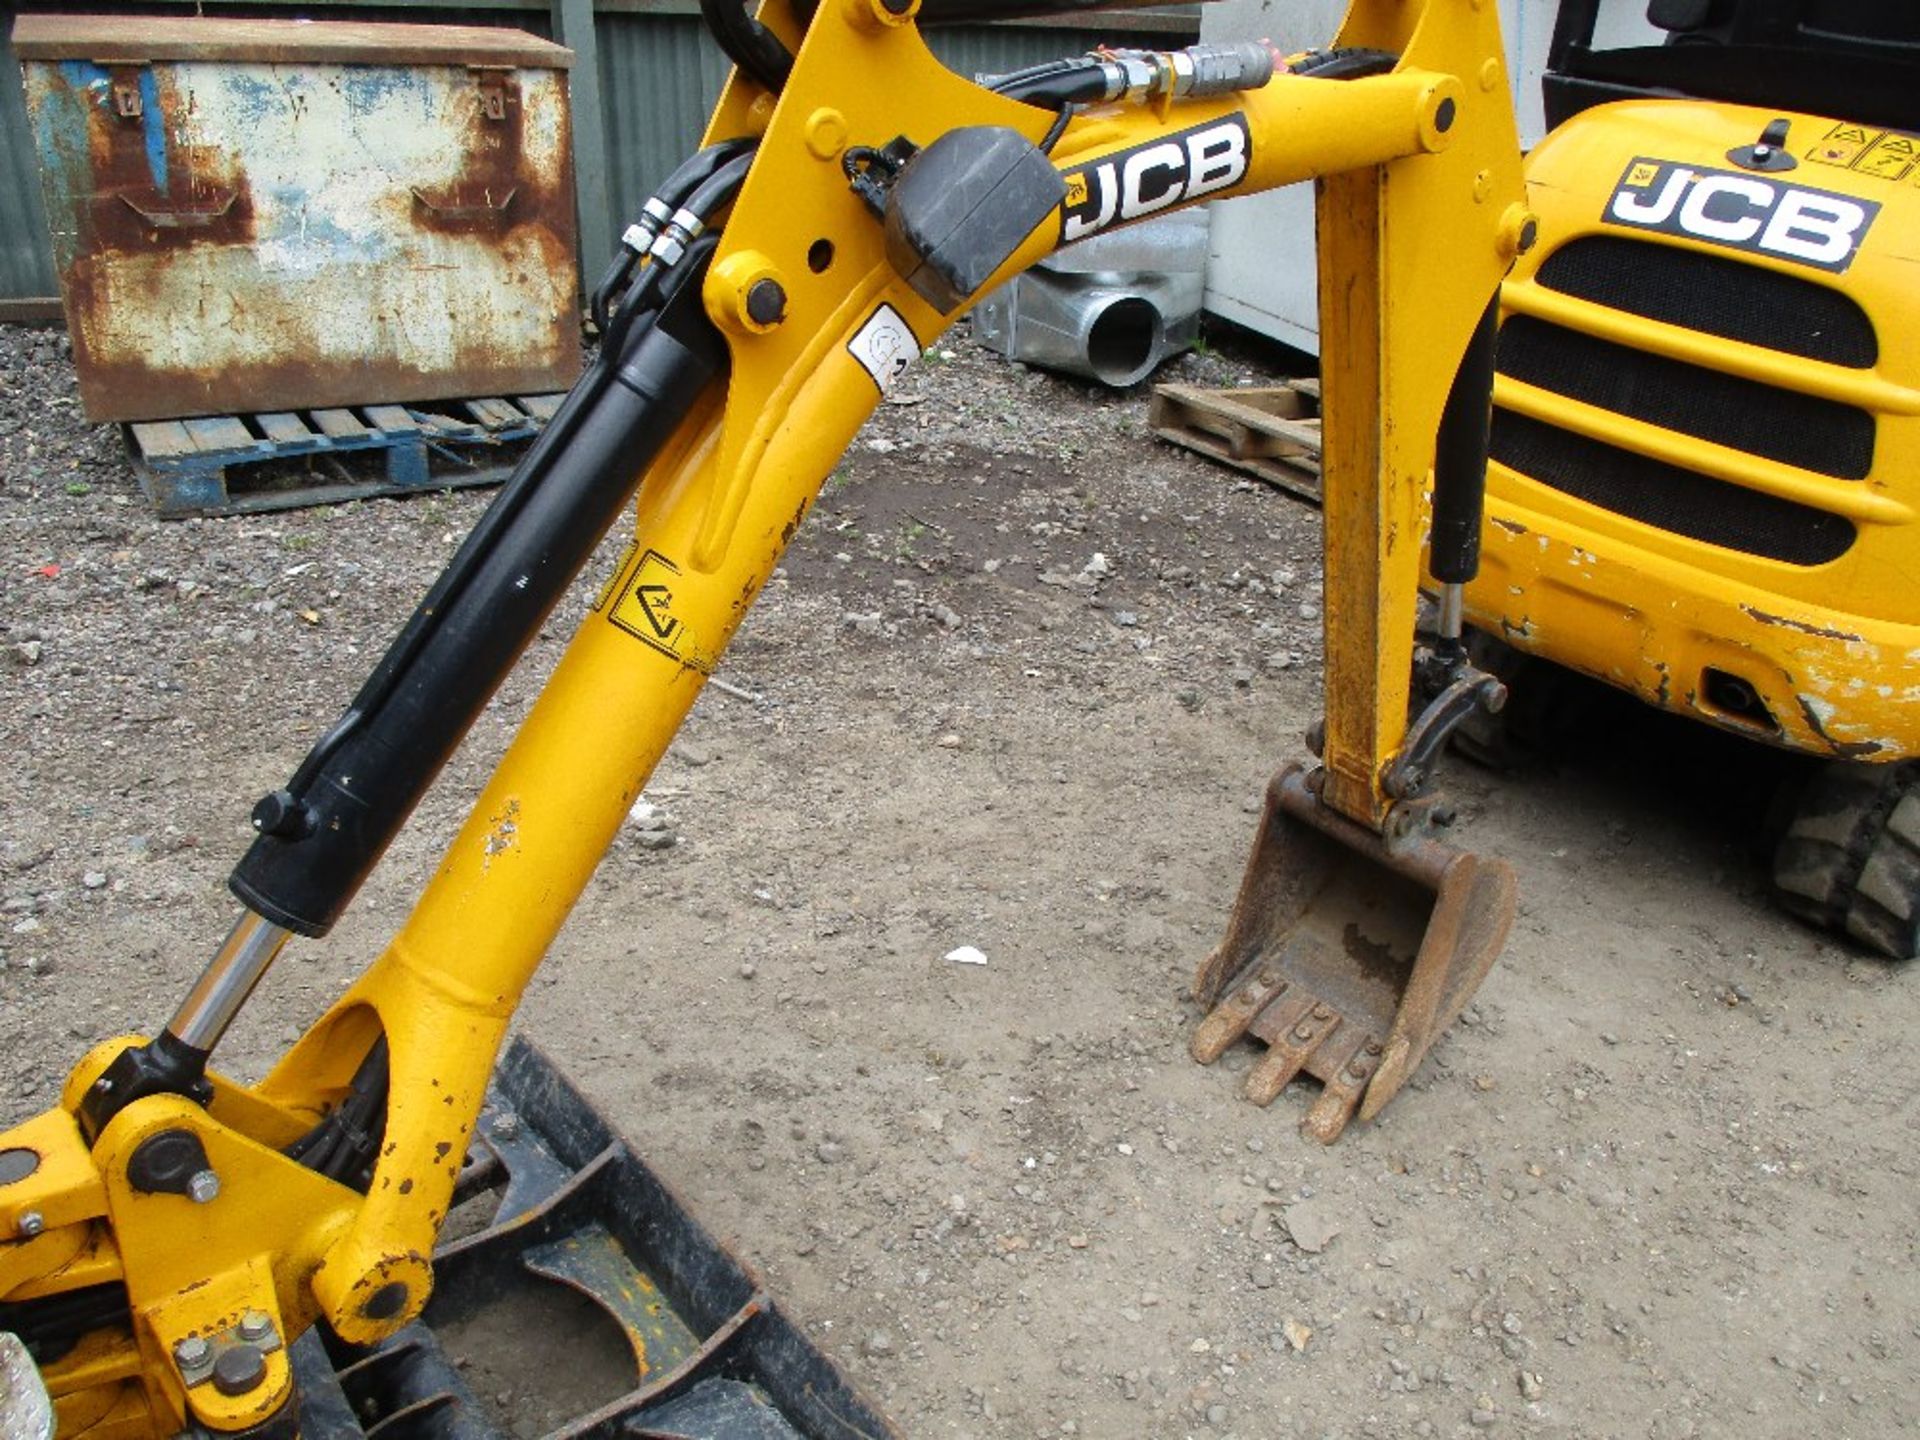 JCB 8008 CTS MICRO EXCAVATOR EXPANDING TRACKS 664REC HRS - Image 2 of 6